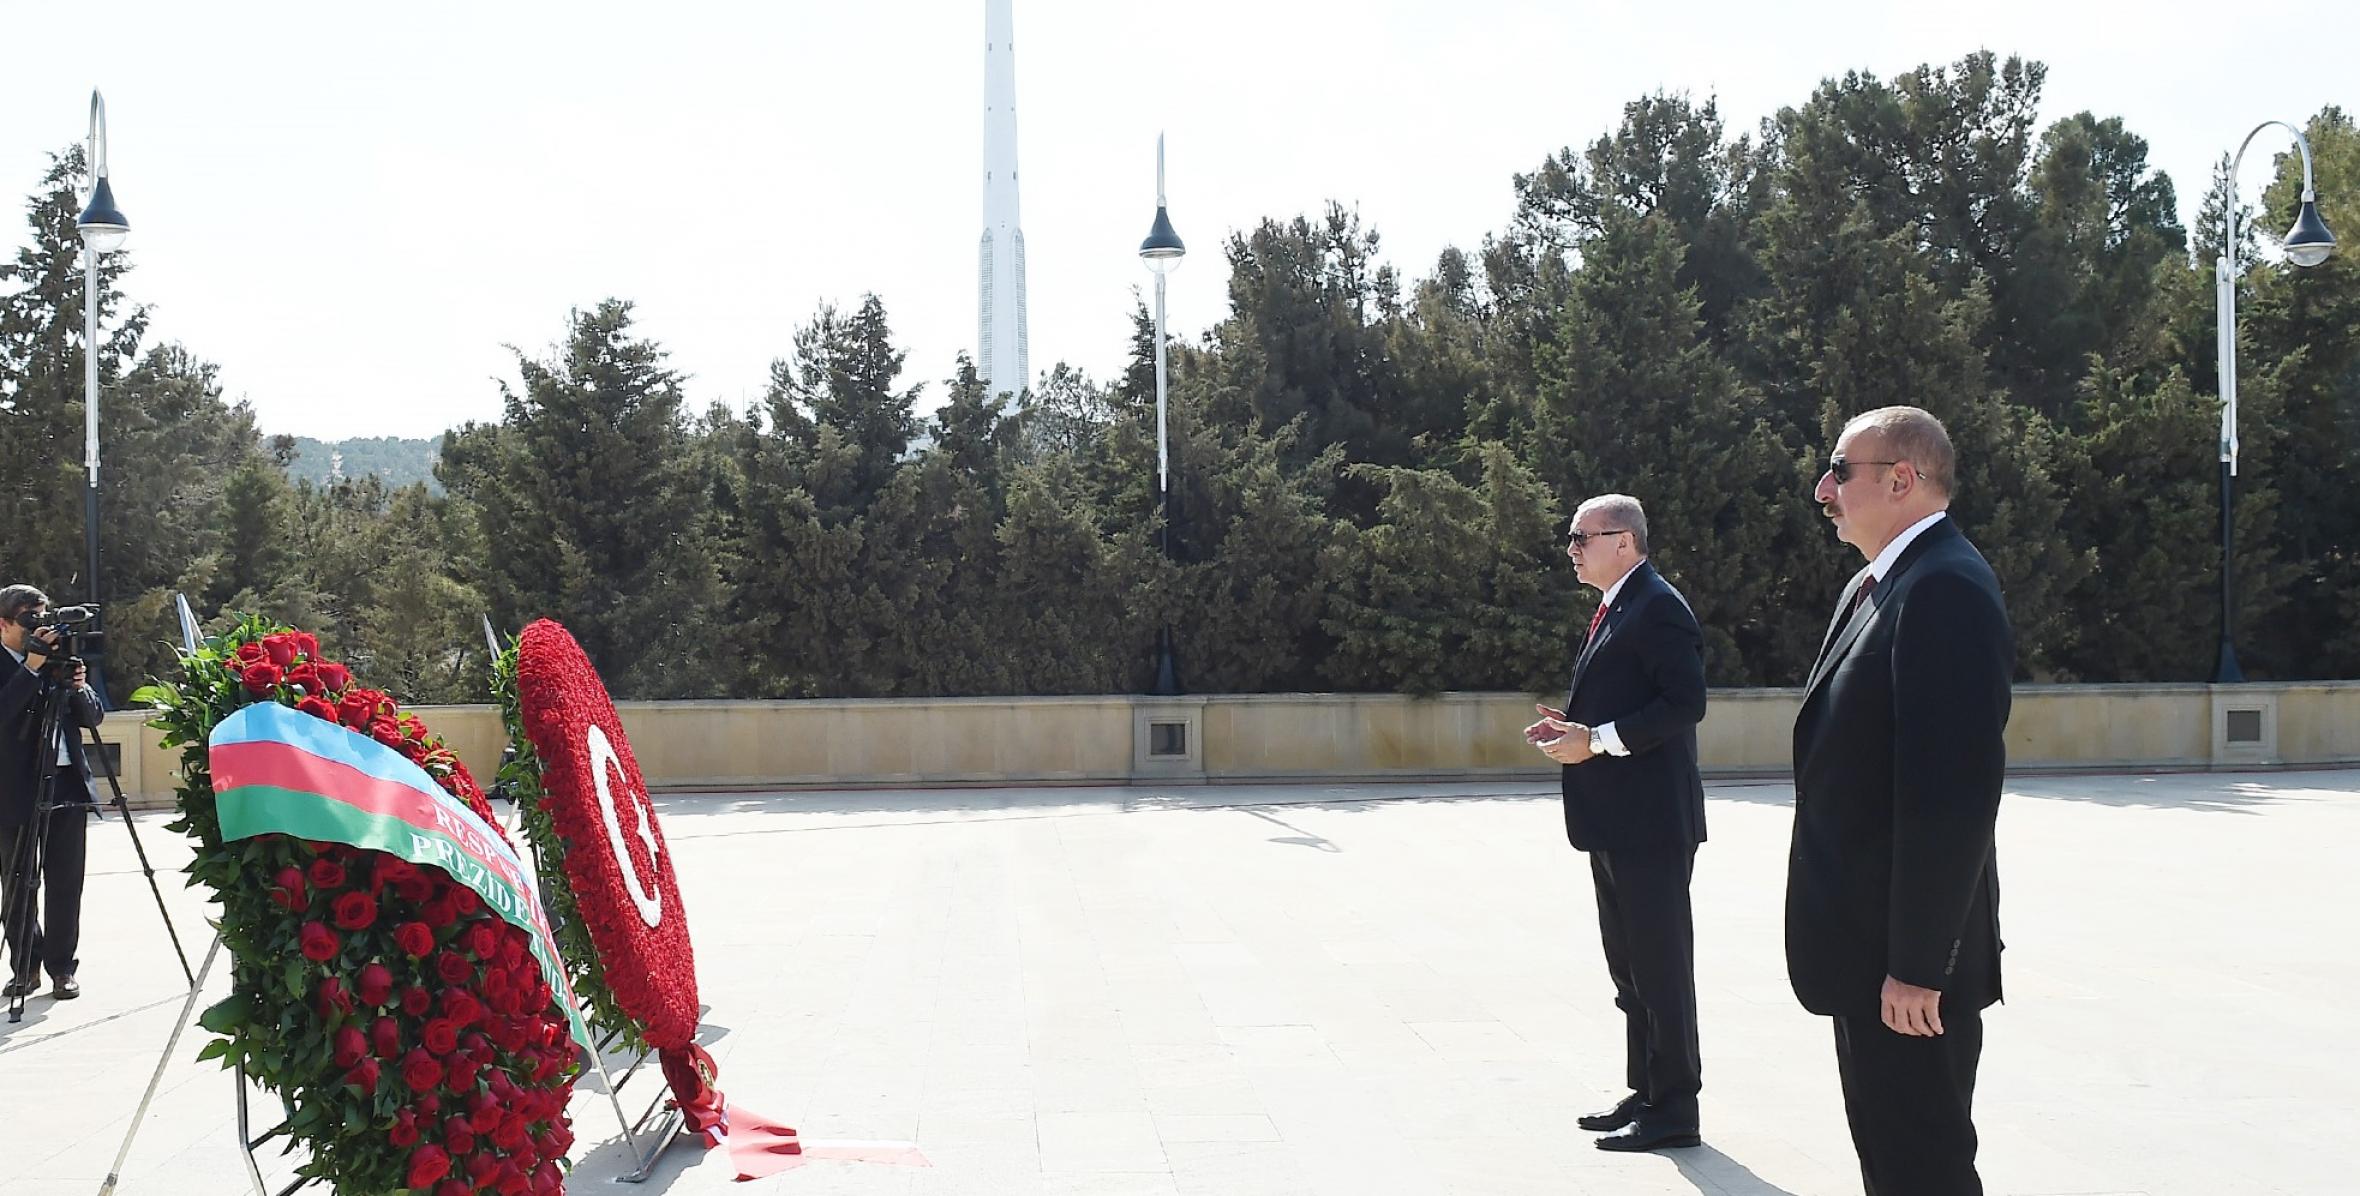 Ilham Aliyev and Recep Tayyip Erdogan have visited the Alley of Martyrs in Baku